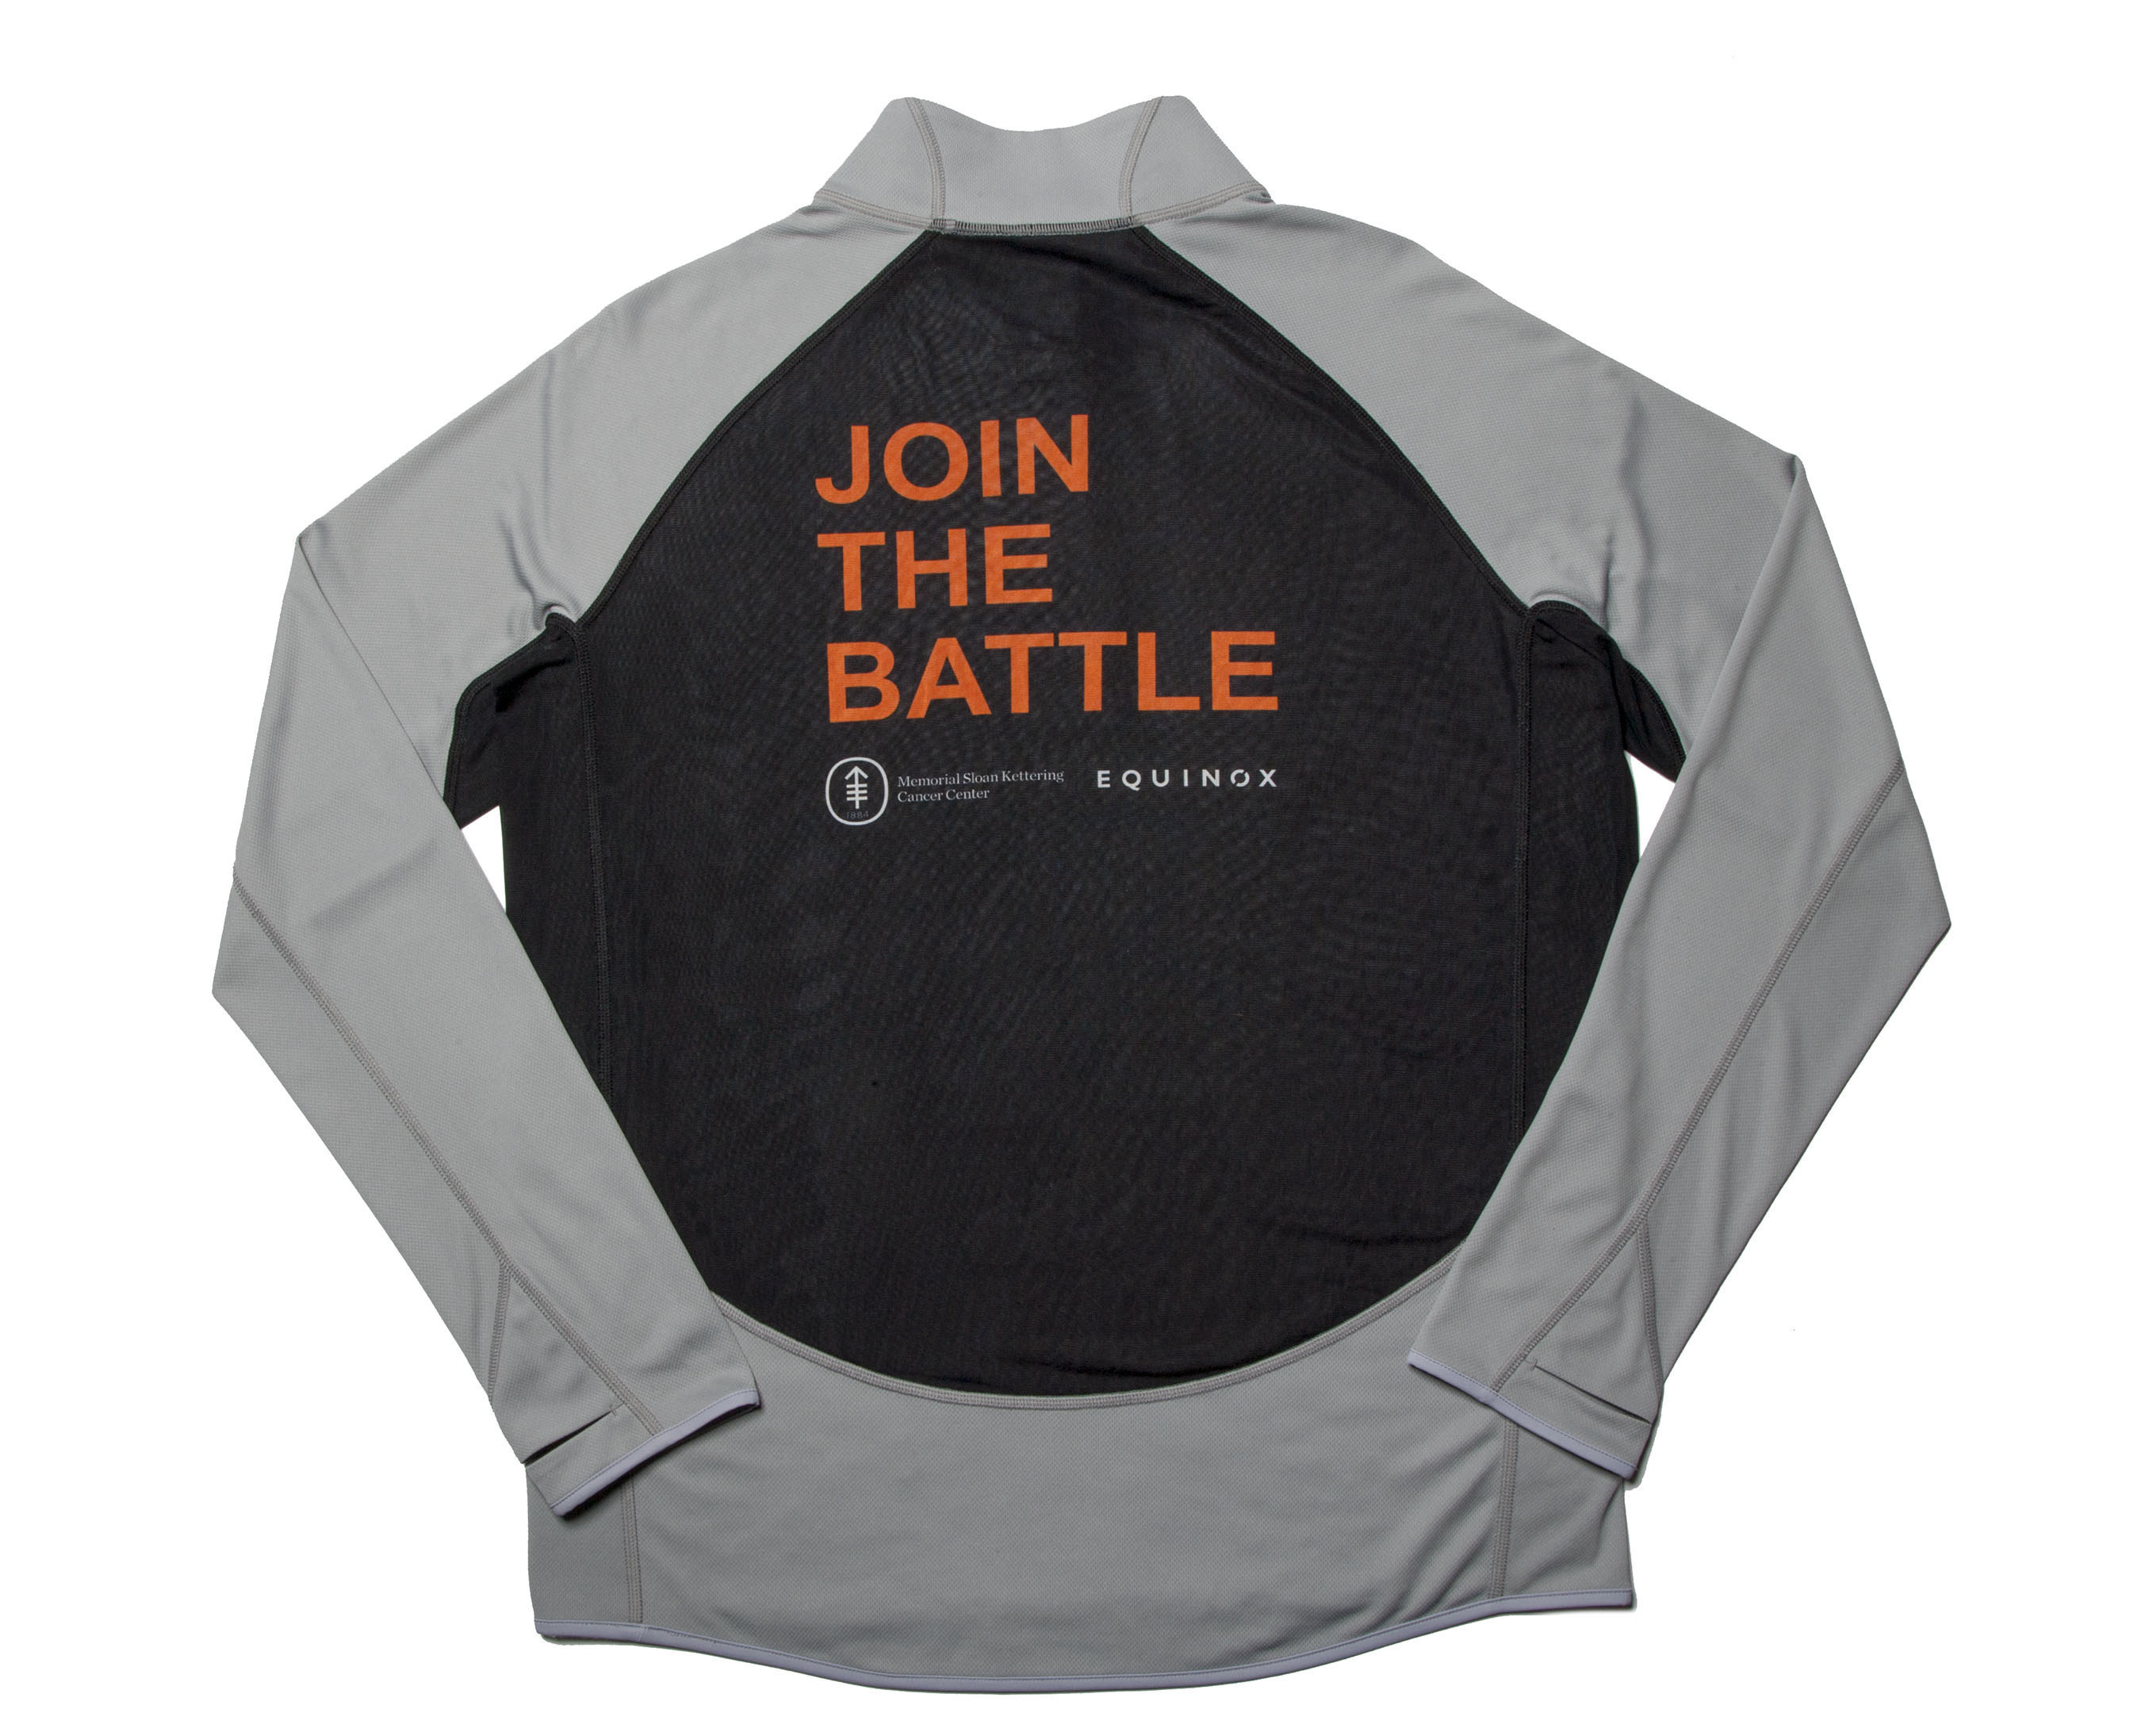 New Balance Performance Half Zip for Cycle for Survival's 2015 events